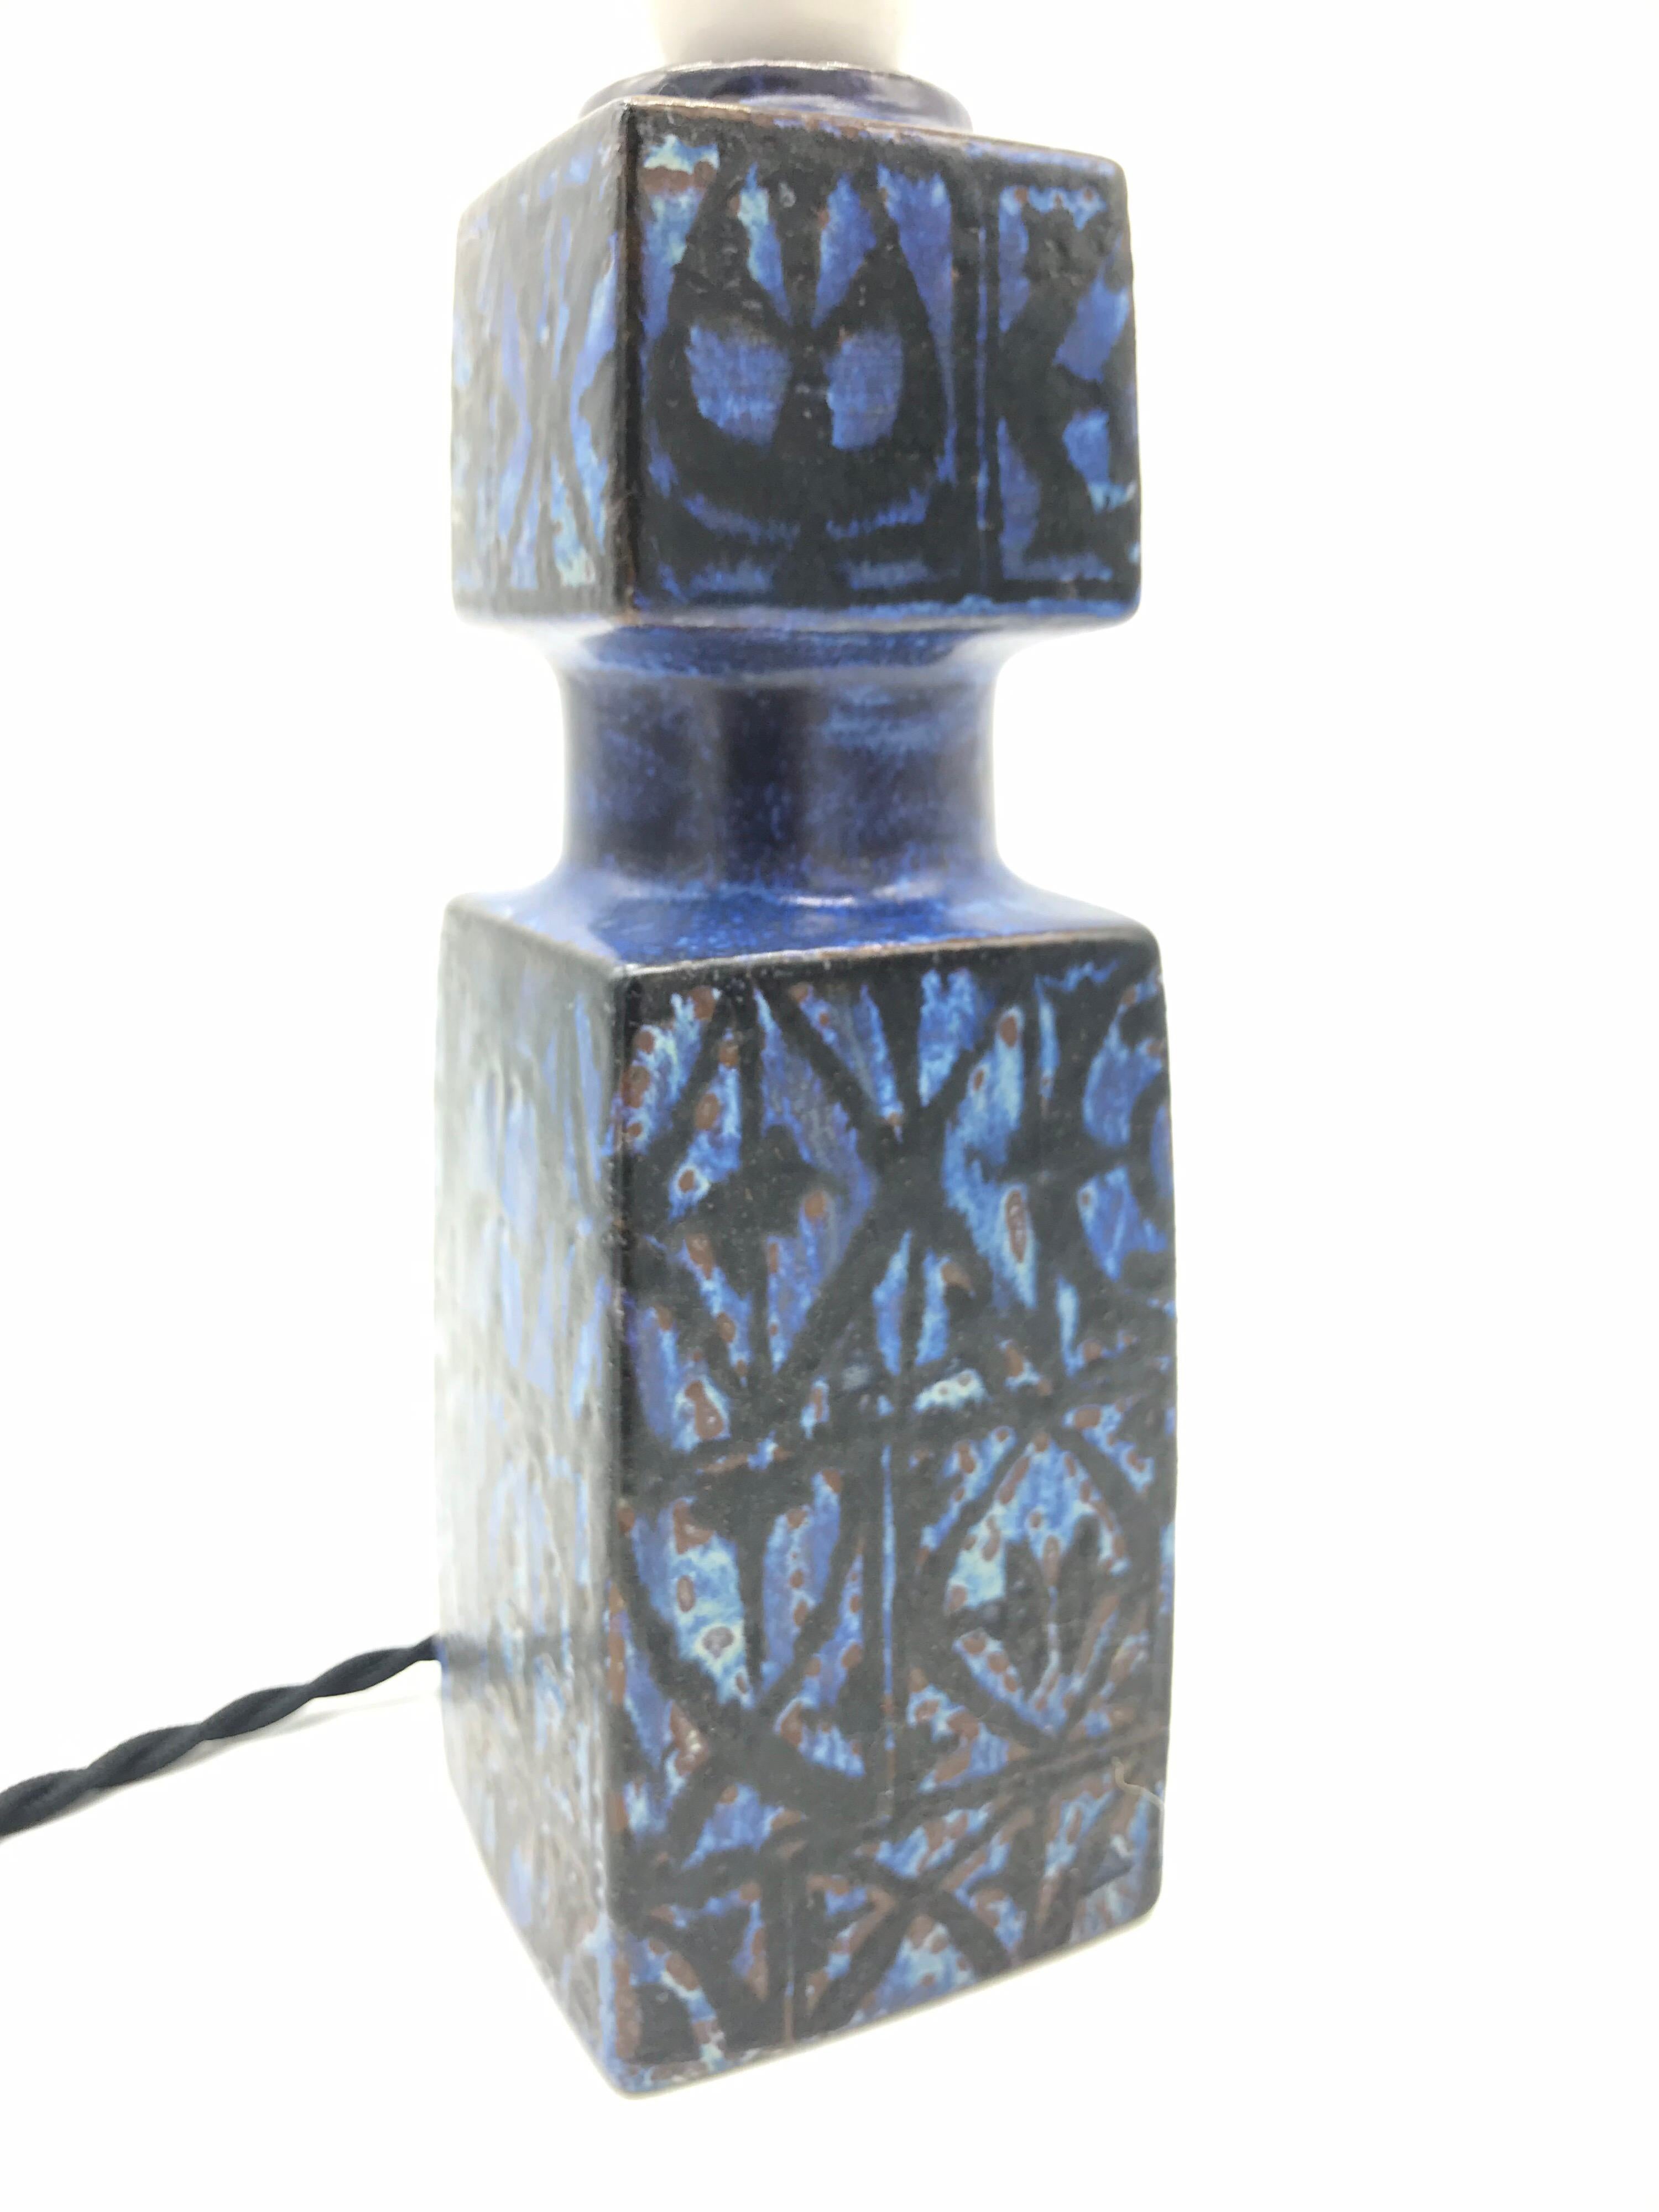 Lovely ceramic table lamp by Fog & Mørup of Copenhagen.
Geometric designs in blue and black.
Rewired and ready to use.